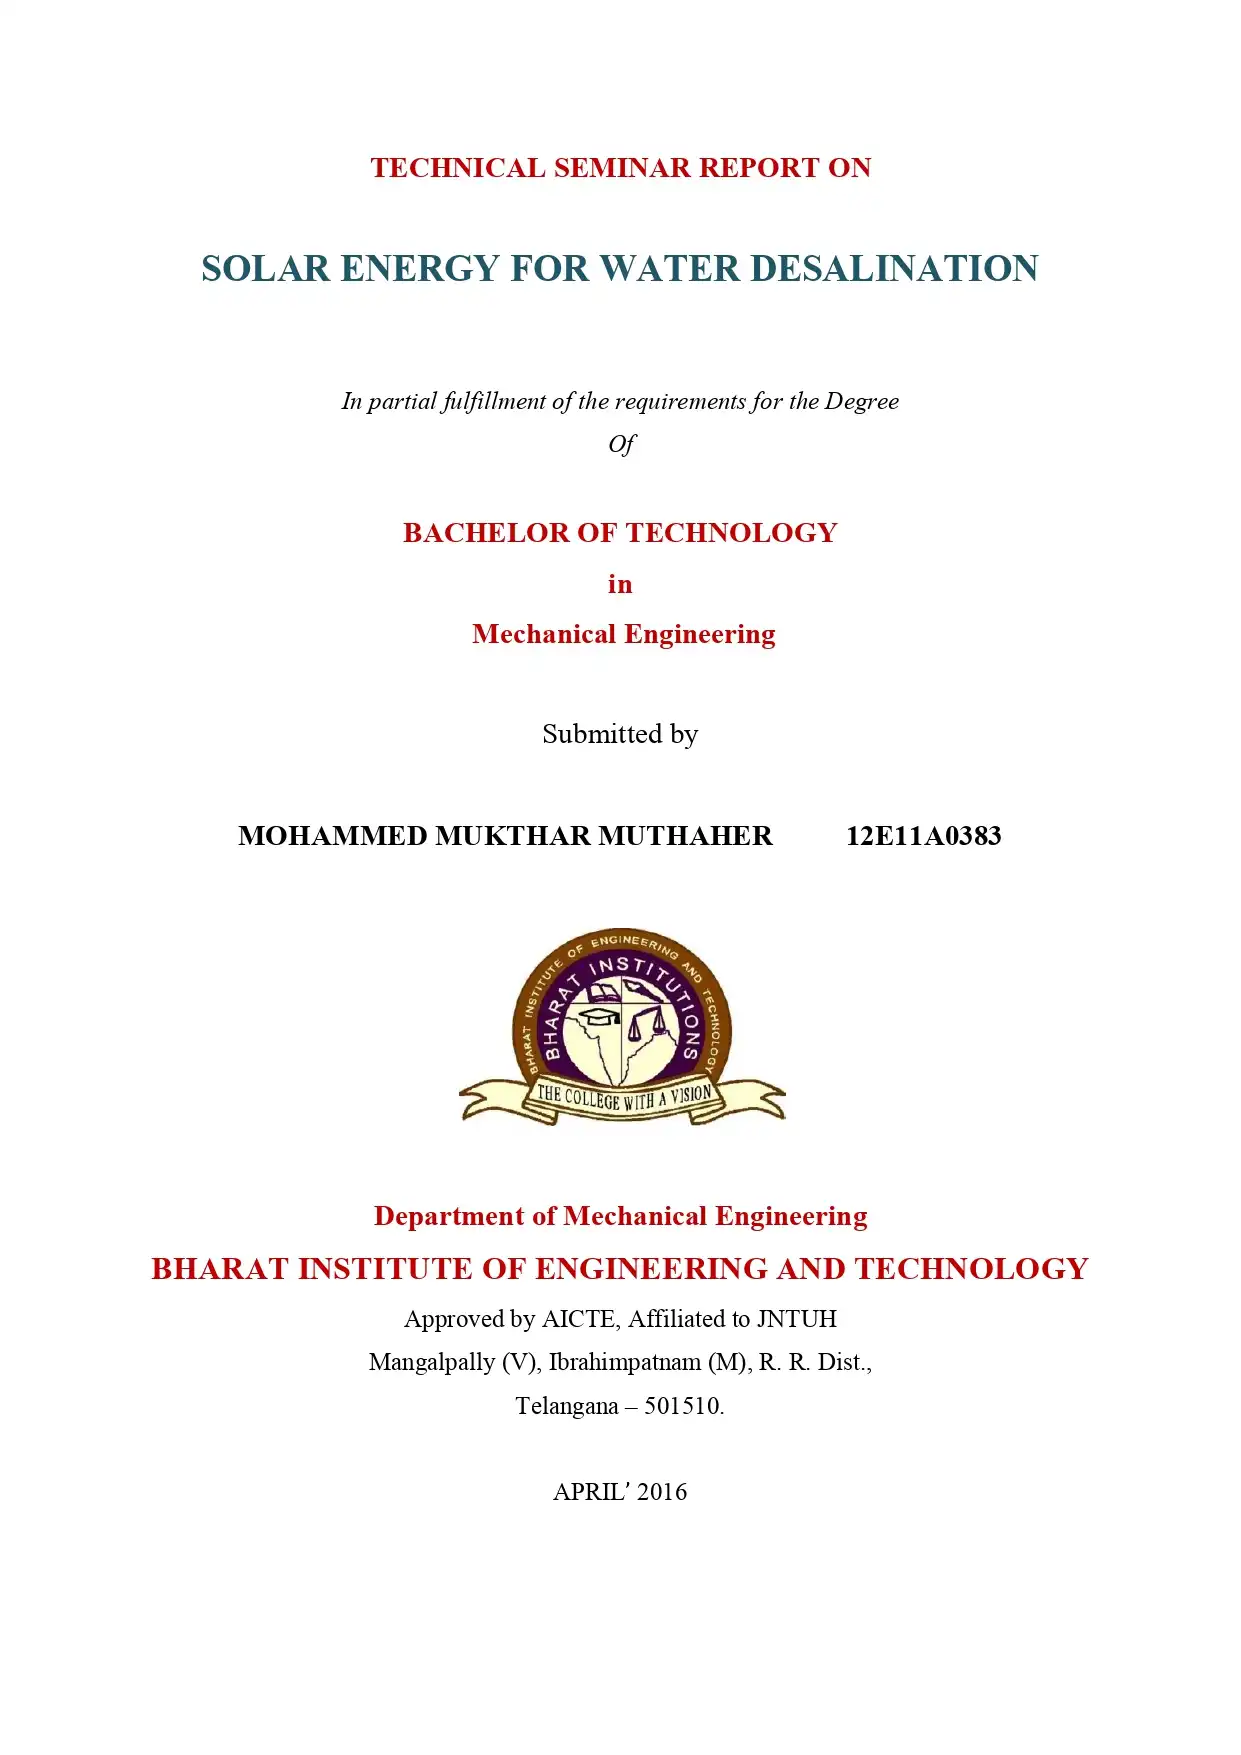 Technical Seminar Report on Solar Energy for Waters Desalination